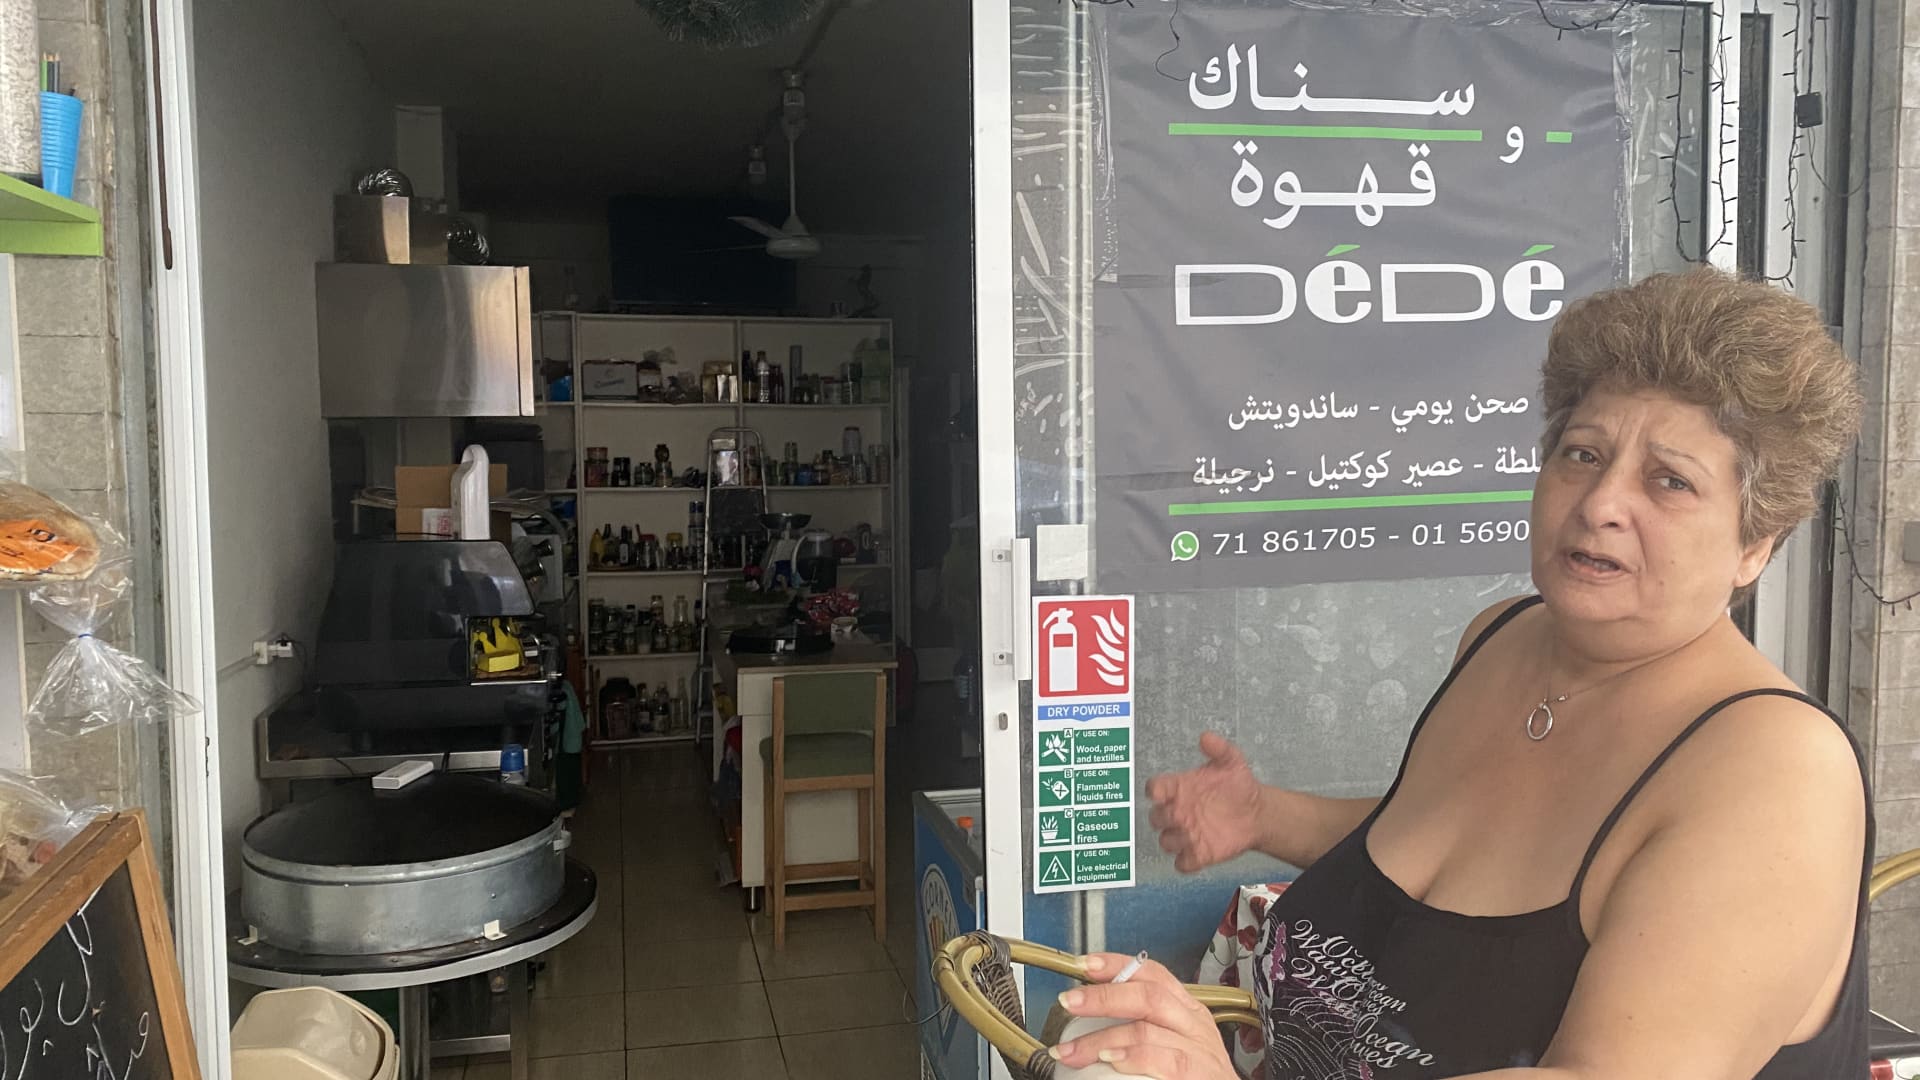 Dede Al Hayek stands in from of her darkened snack shop in Beirut's Geitawy district, which she had to close due to Lebanon's financial and fuel crisis. Beirut, Lebanon, September 25 2021.